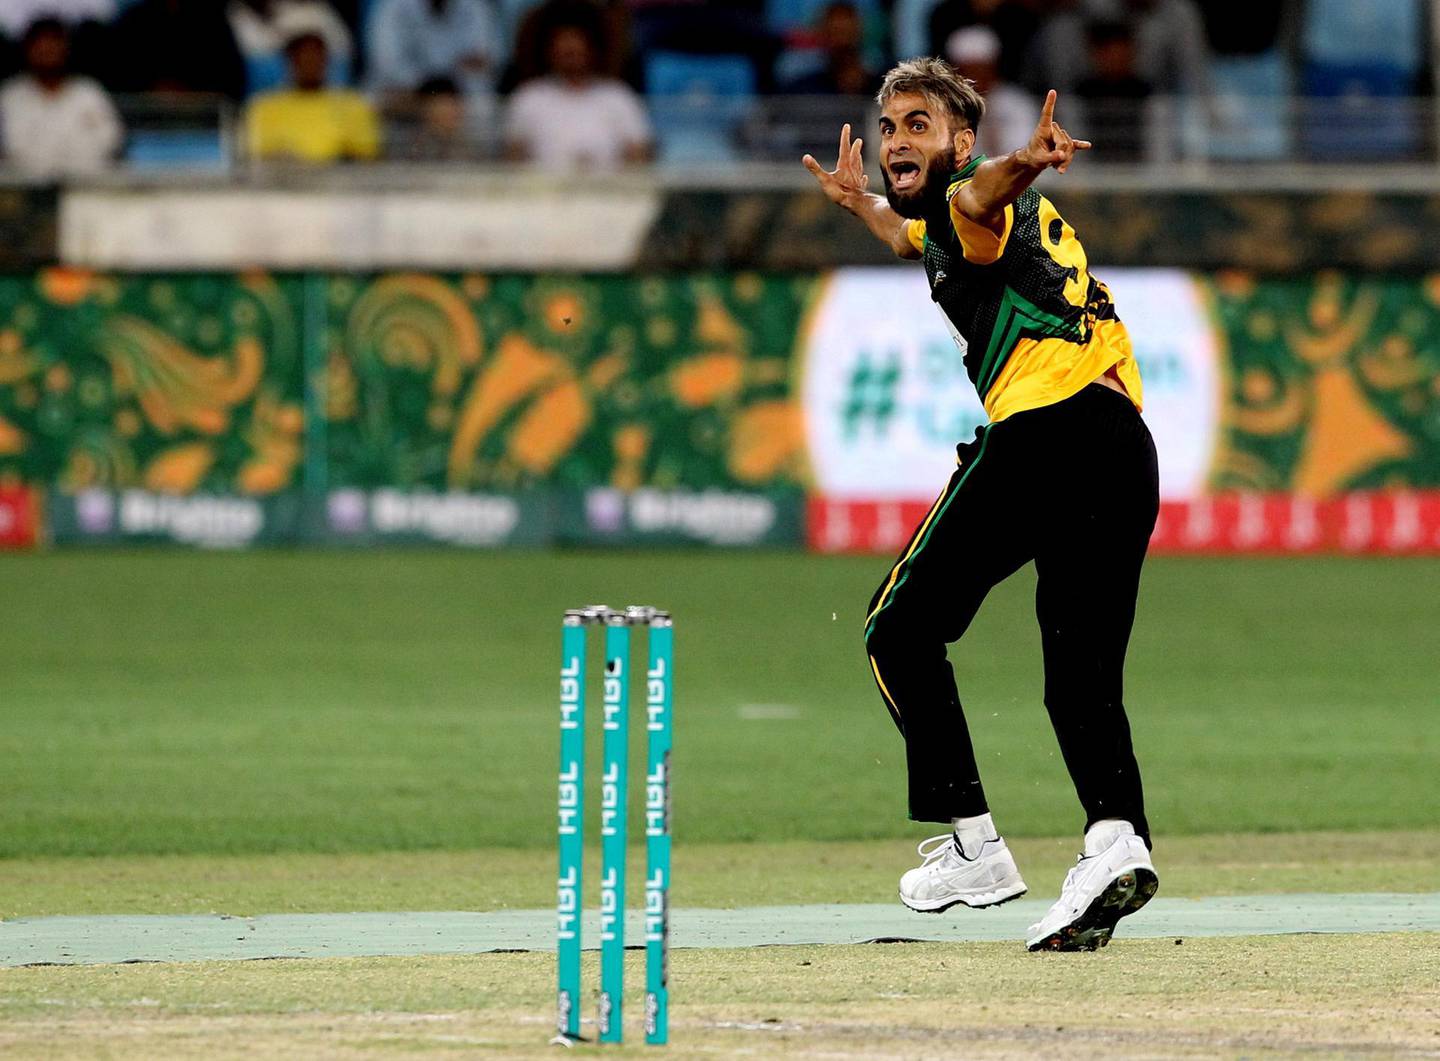 Dubai, Feb 25, 2018: Imran Tahir of Multan Sultan celebrates after dismissing Andre Russell during their match against Islamabad United during the Pakistan Super League 2018 at the Dubai International Cricket Stadium. Satish Kumar for the National / Story by Paul Radley